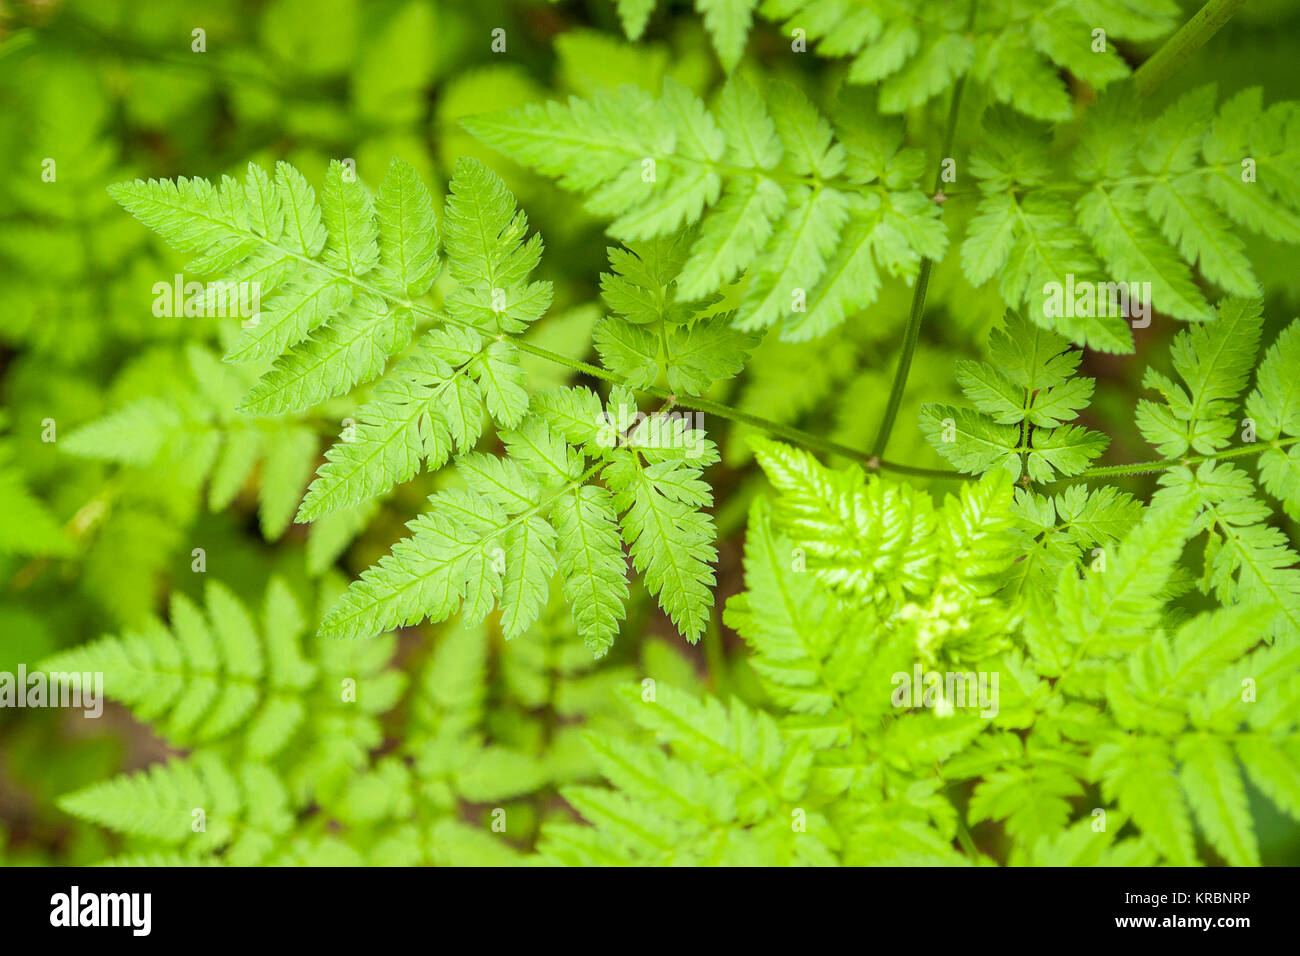 green leaves pattern Stock Photo